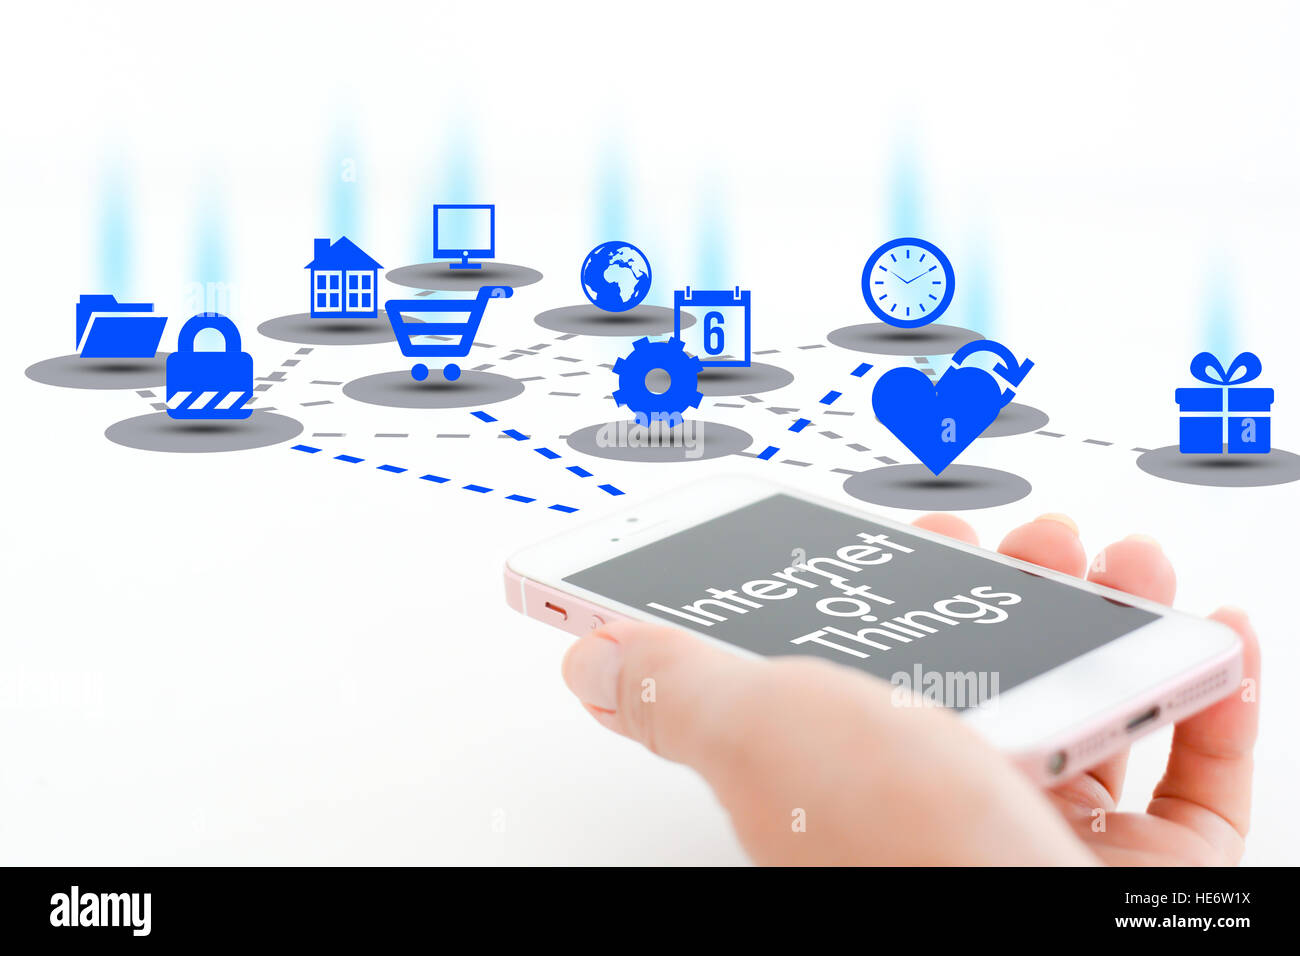 Internet of things concept with smartphone and different apps icons Stock Photo